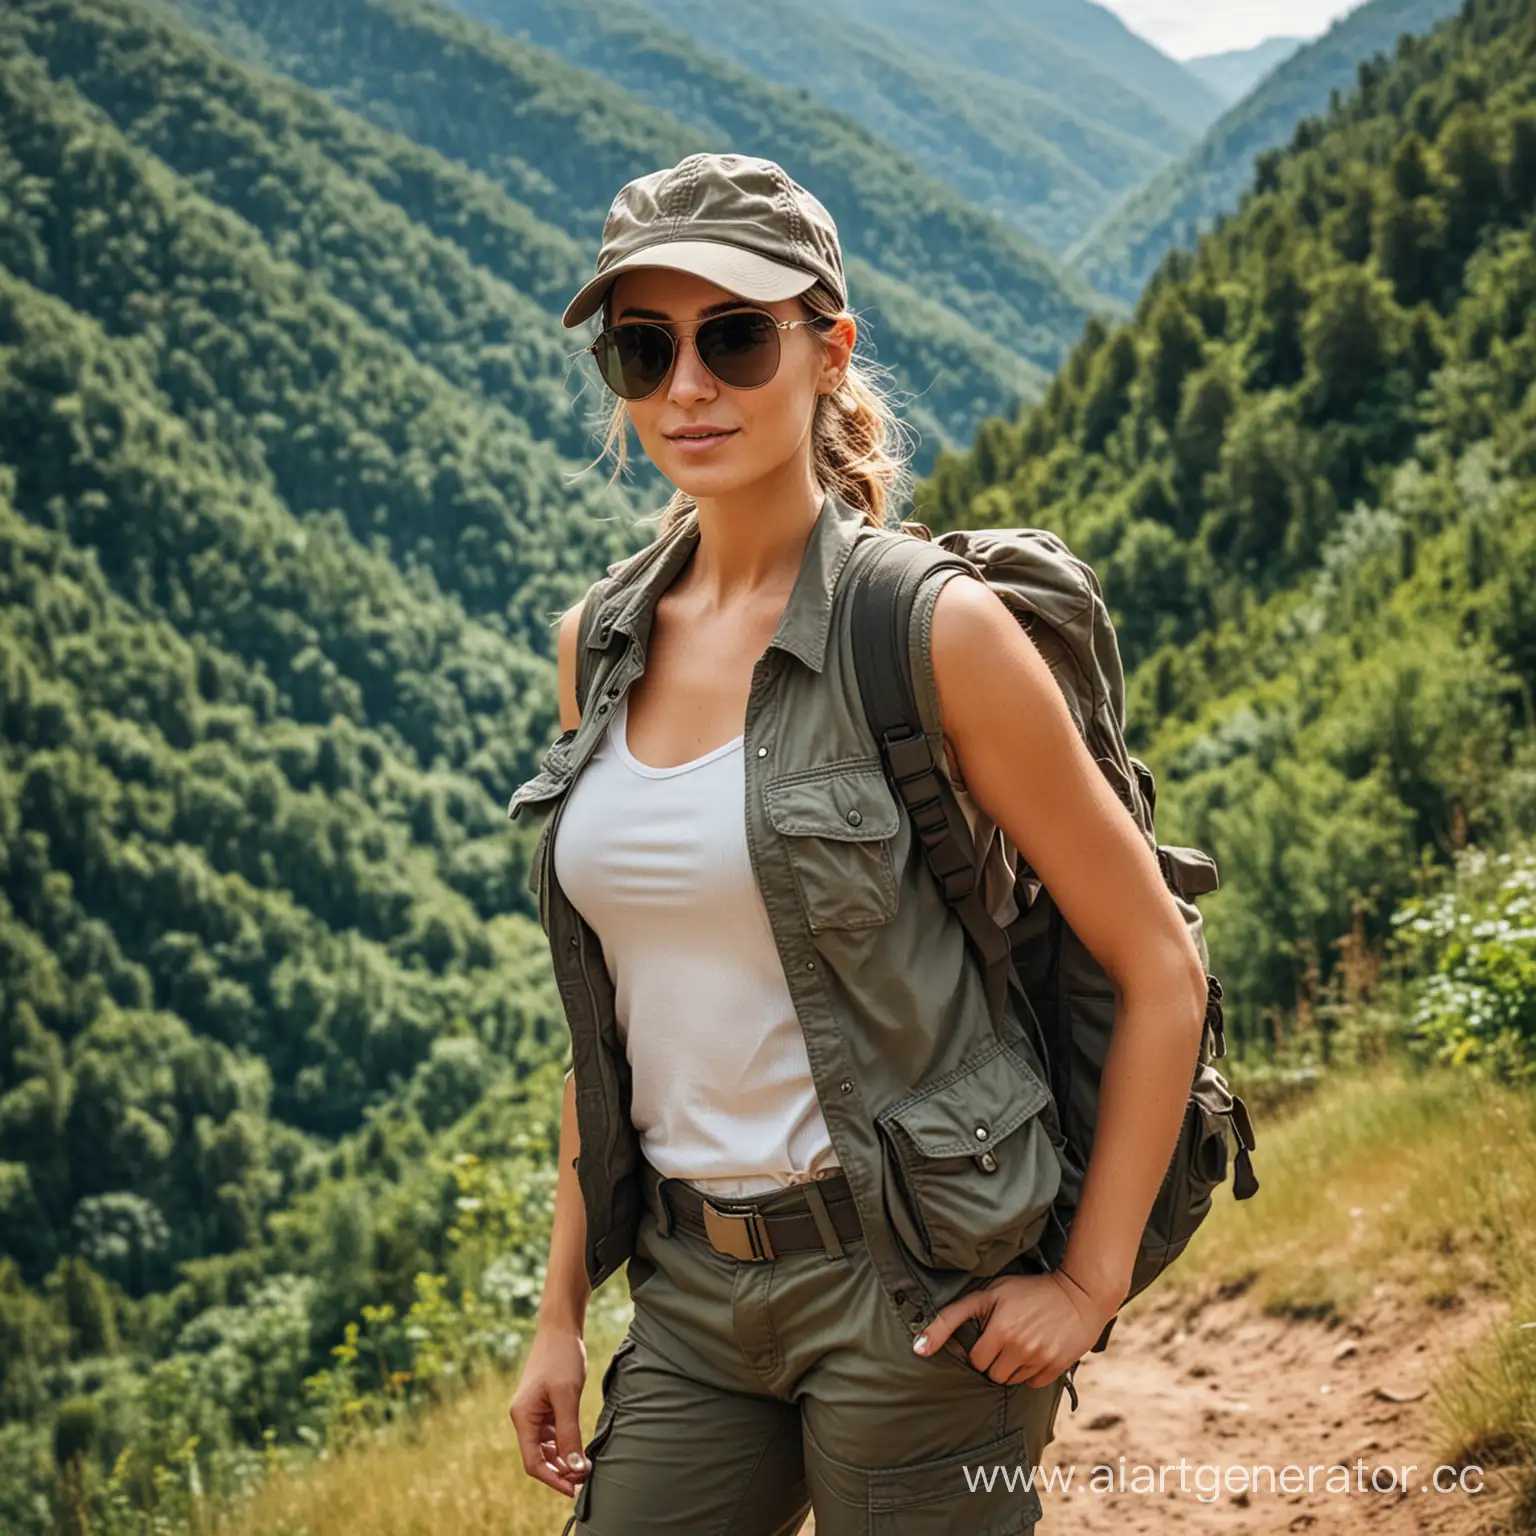 Stylish-Female-Traveler-with-Sunglasses-and-Backpack-Exploring-Forested-Hills